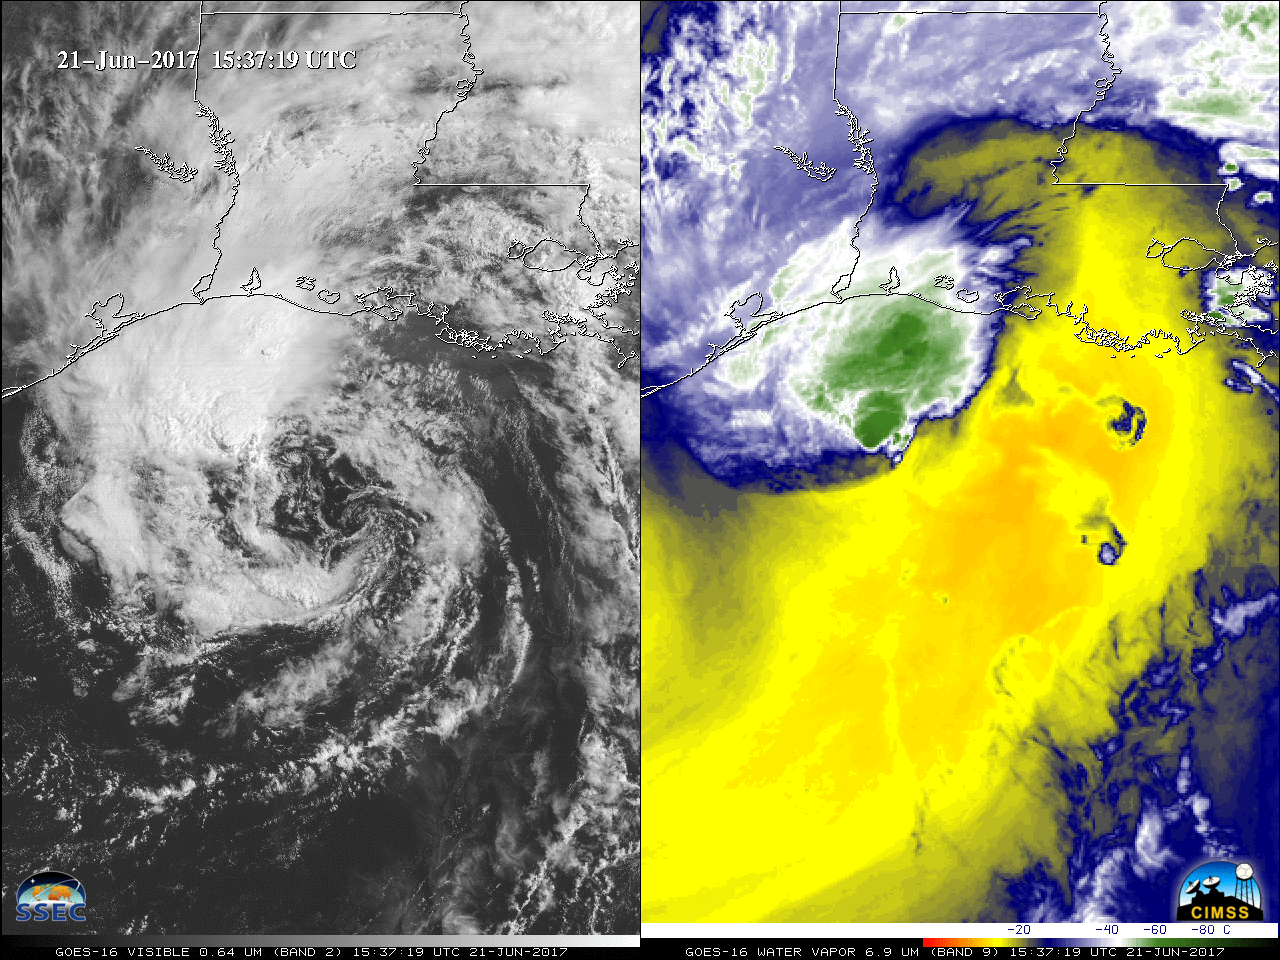 GOES-16 Visible (0.64 µm, left) and Water Vapor (6..9 µm, right) images [click to play MP4 animation]